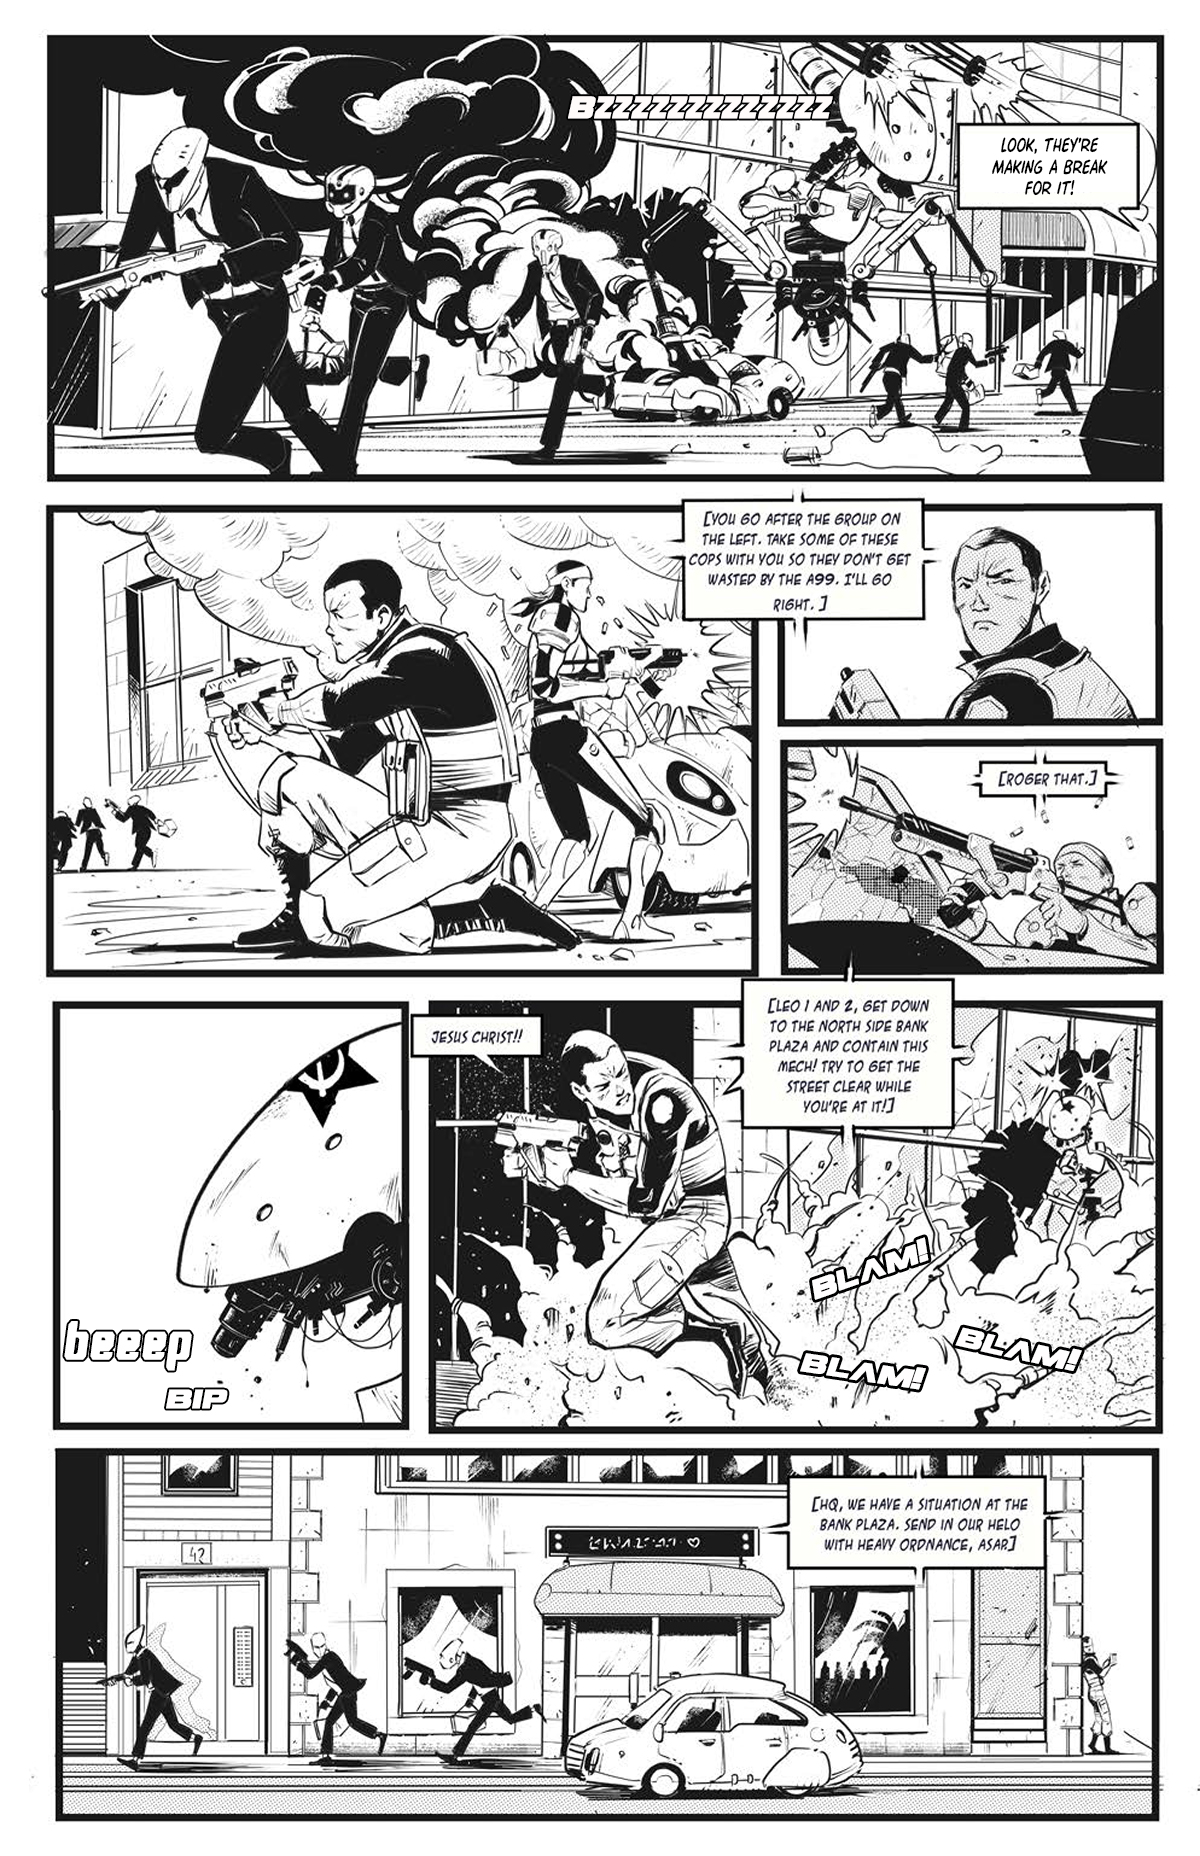 Page 3 of Bank Robbery